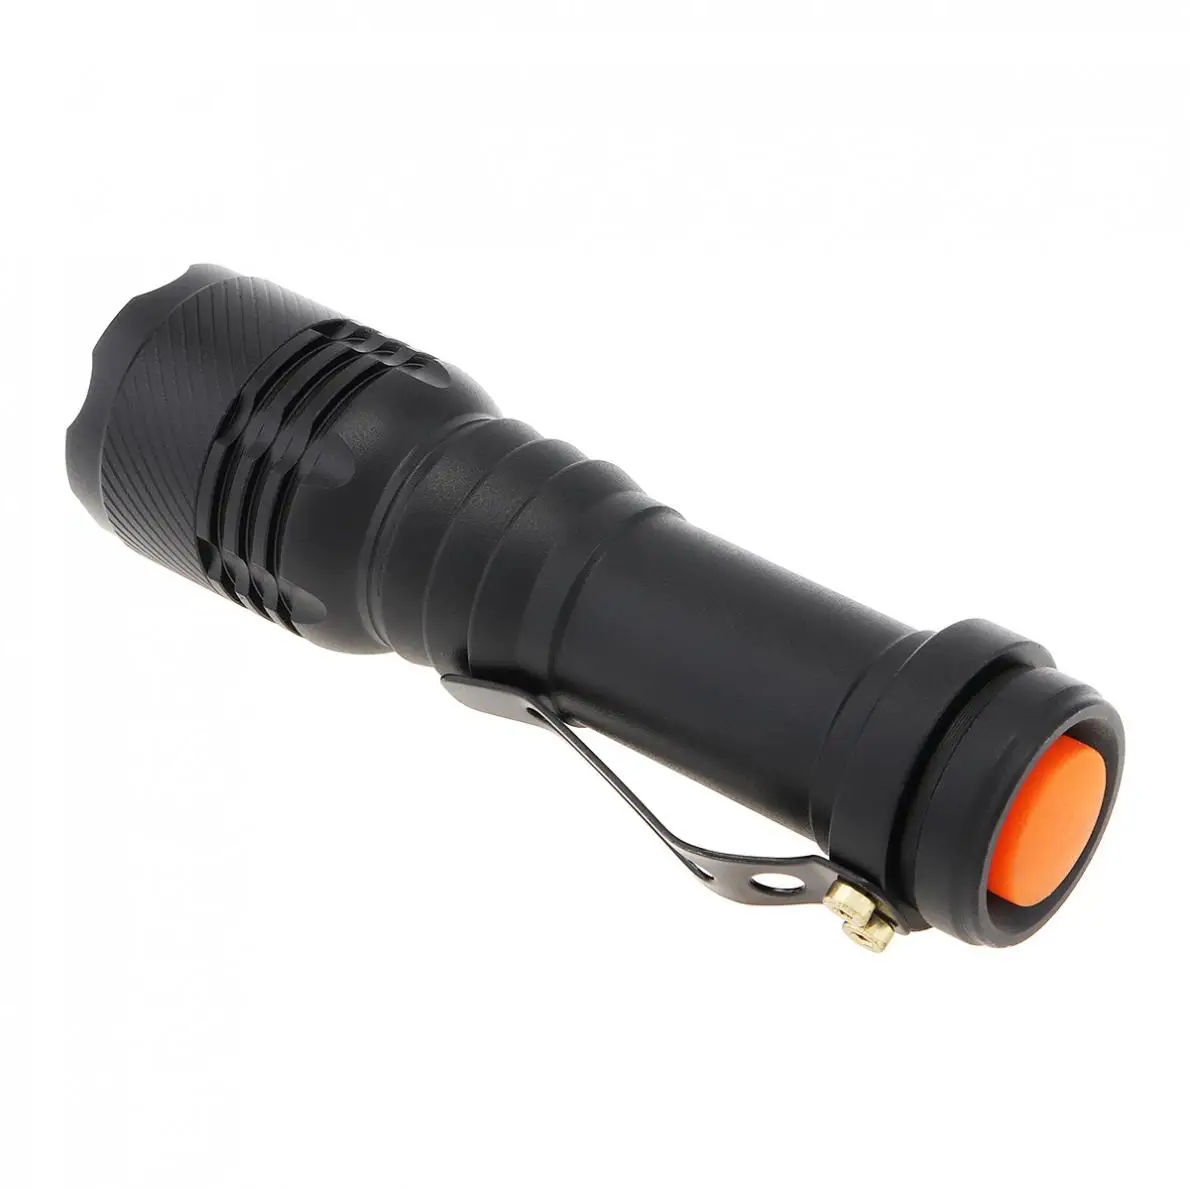 SKYWOLFEYE 8000LM NEW XPE LED-Taschenlampe AAA Batterie Stream Lampe TorchWH PT 